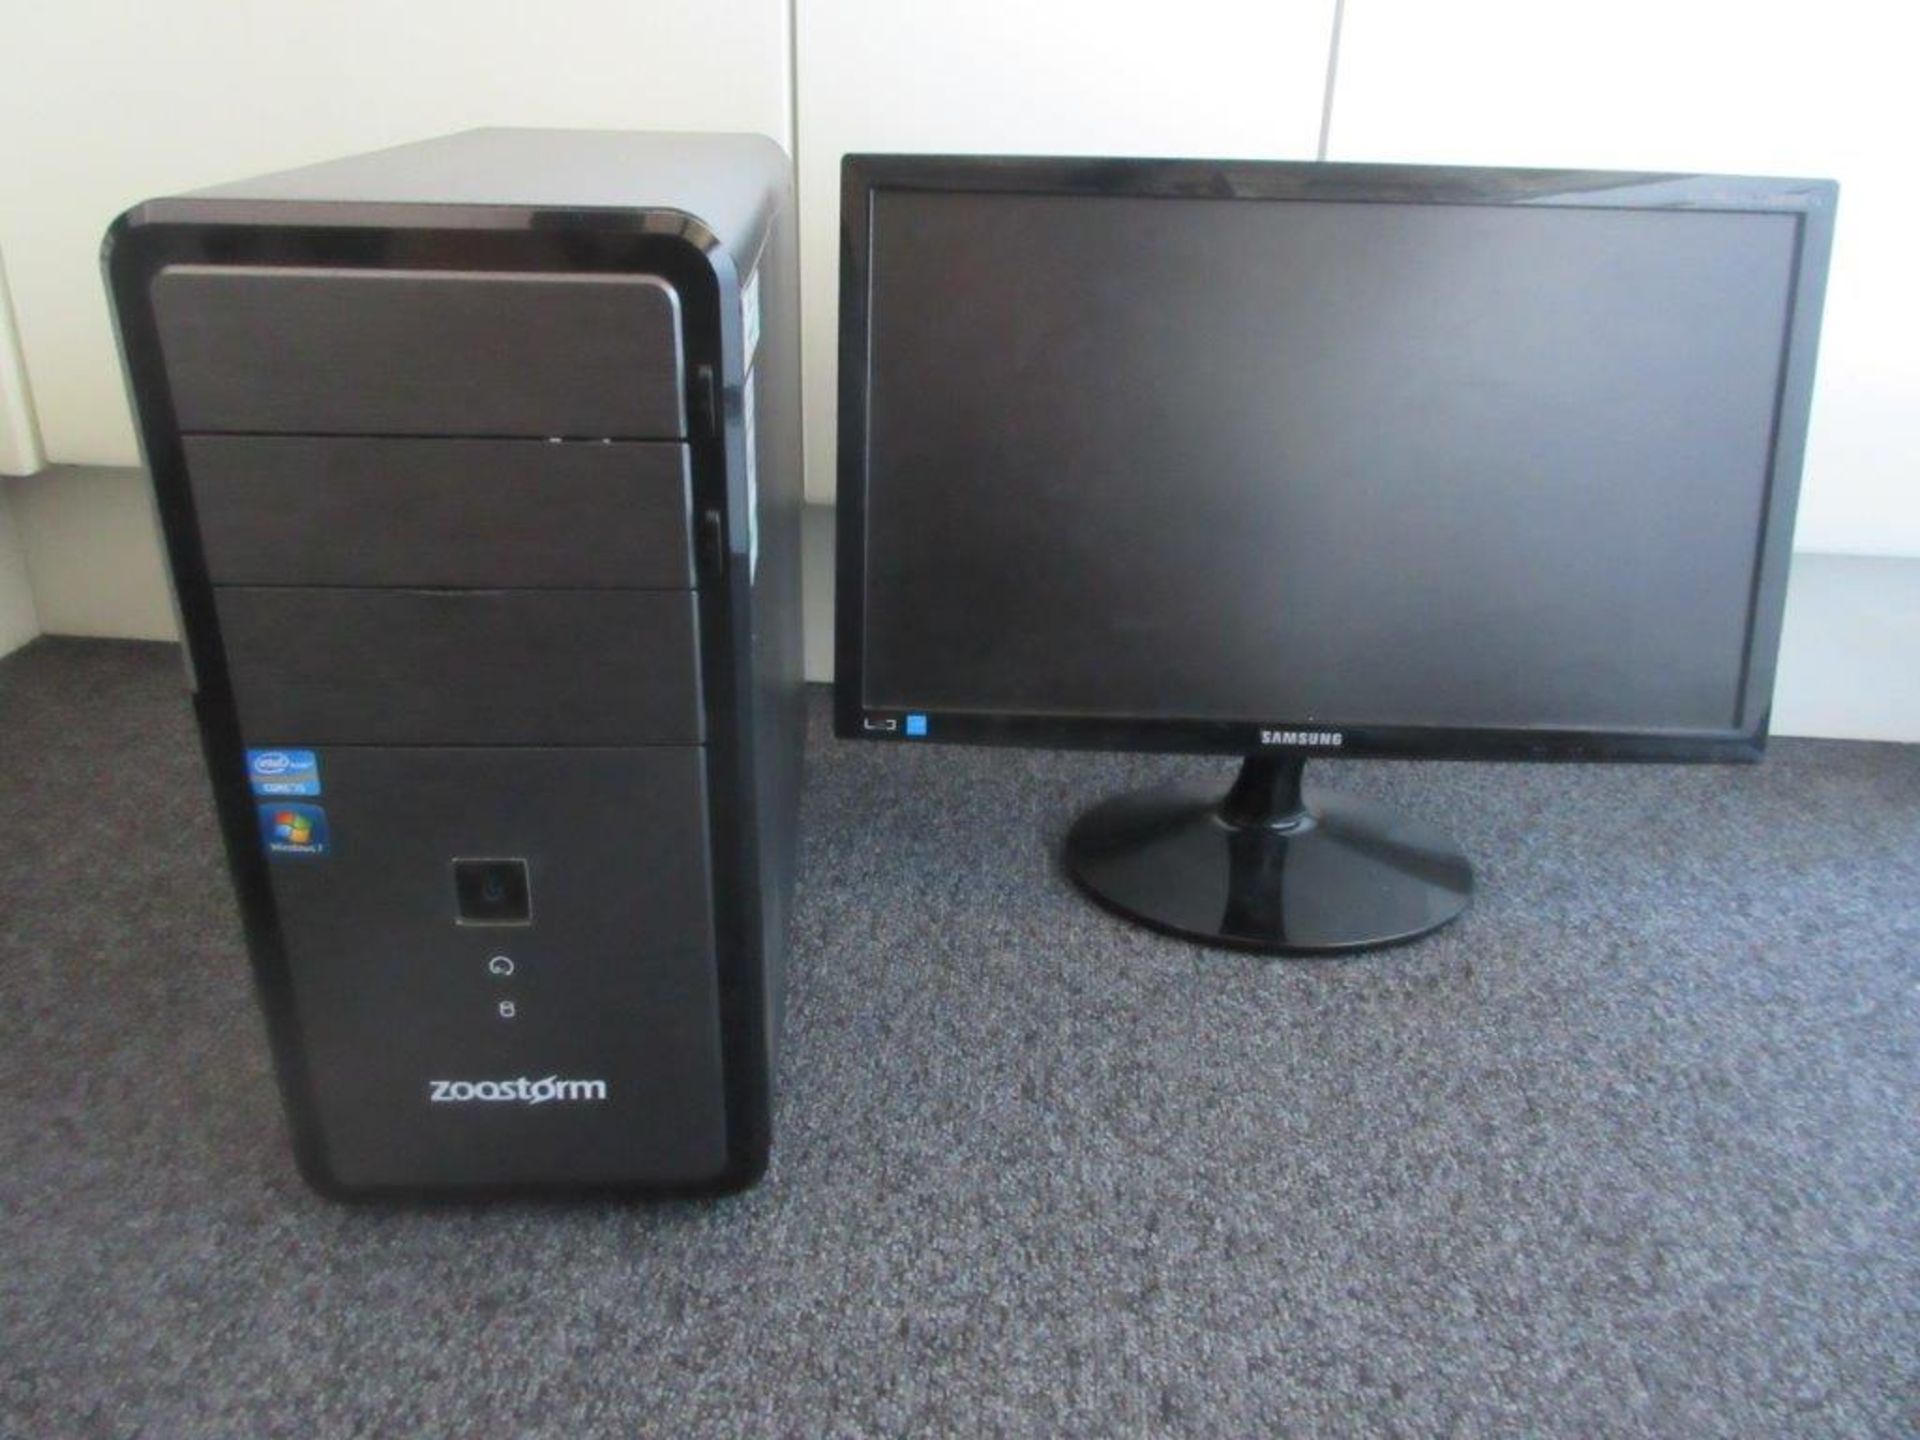 Zoostorm tower desktop computer with flat screen monitor incorporating i5 processor - Image 2 of 4